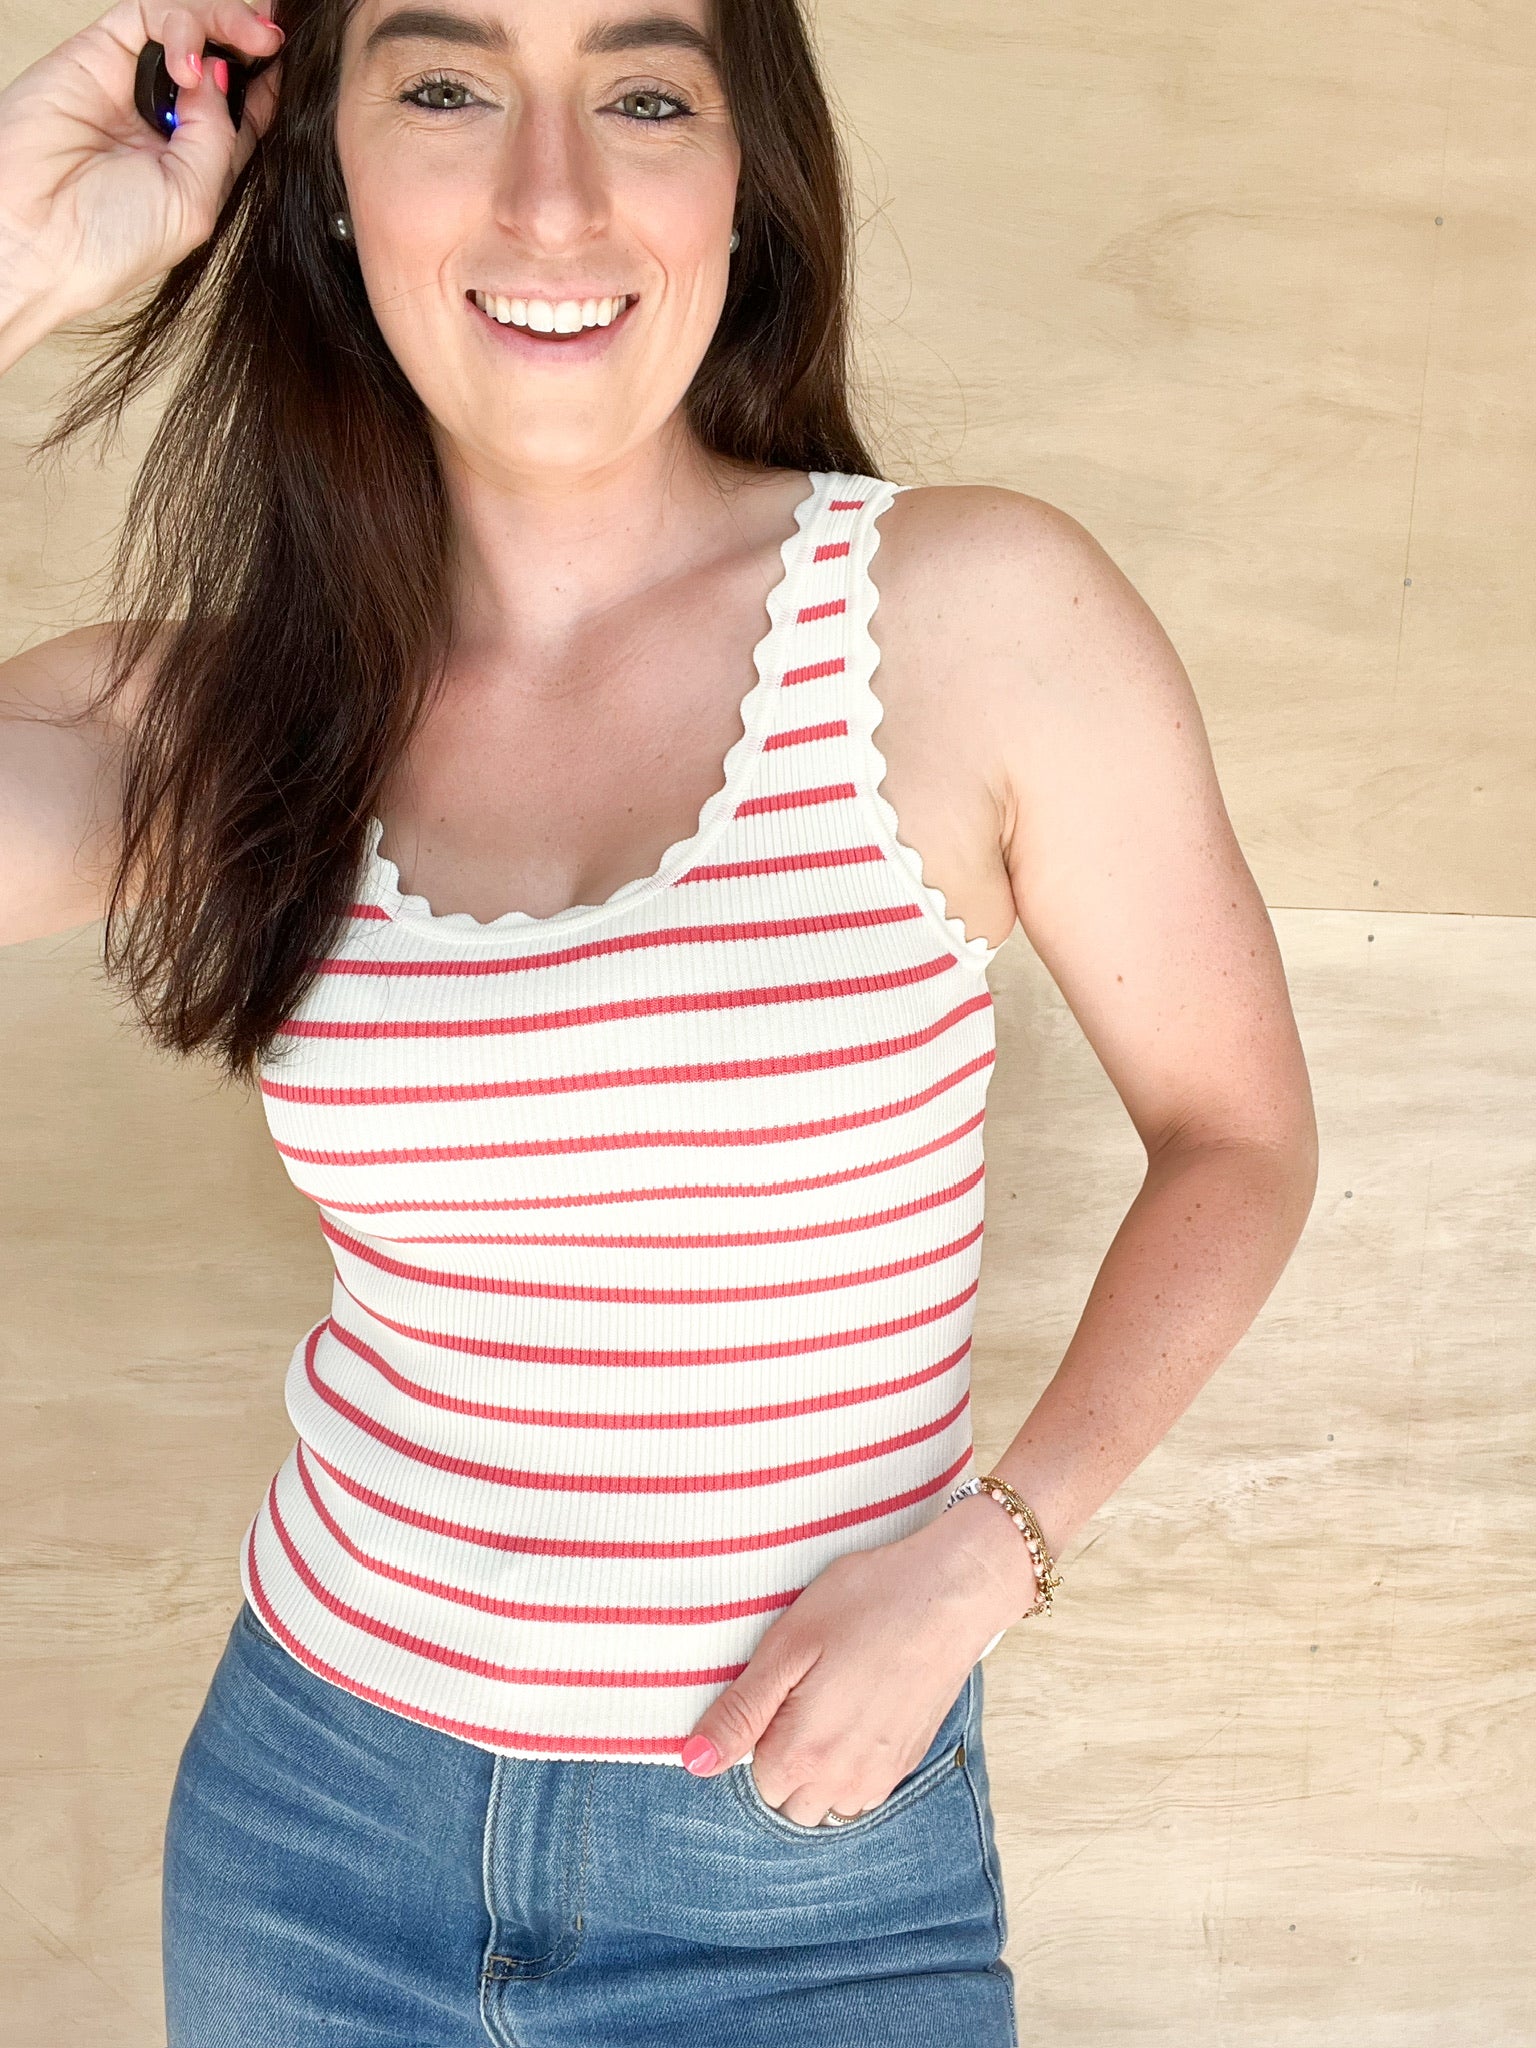 White tank top with coral stripes, scoop neck line, scalloped detailed edges on the neckline and strap, full length tank top, 